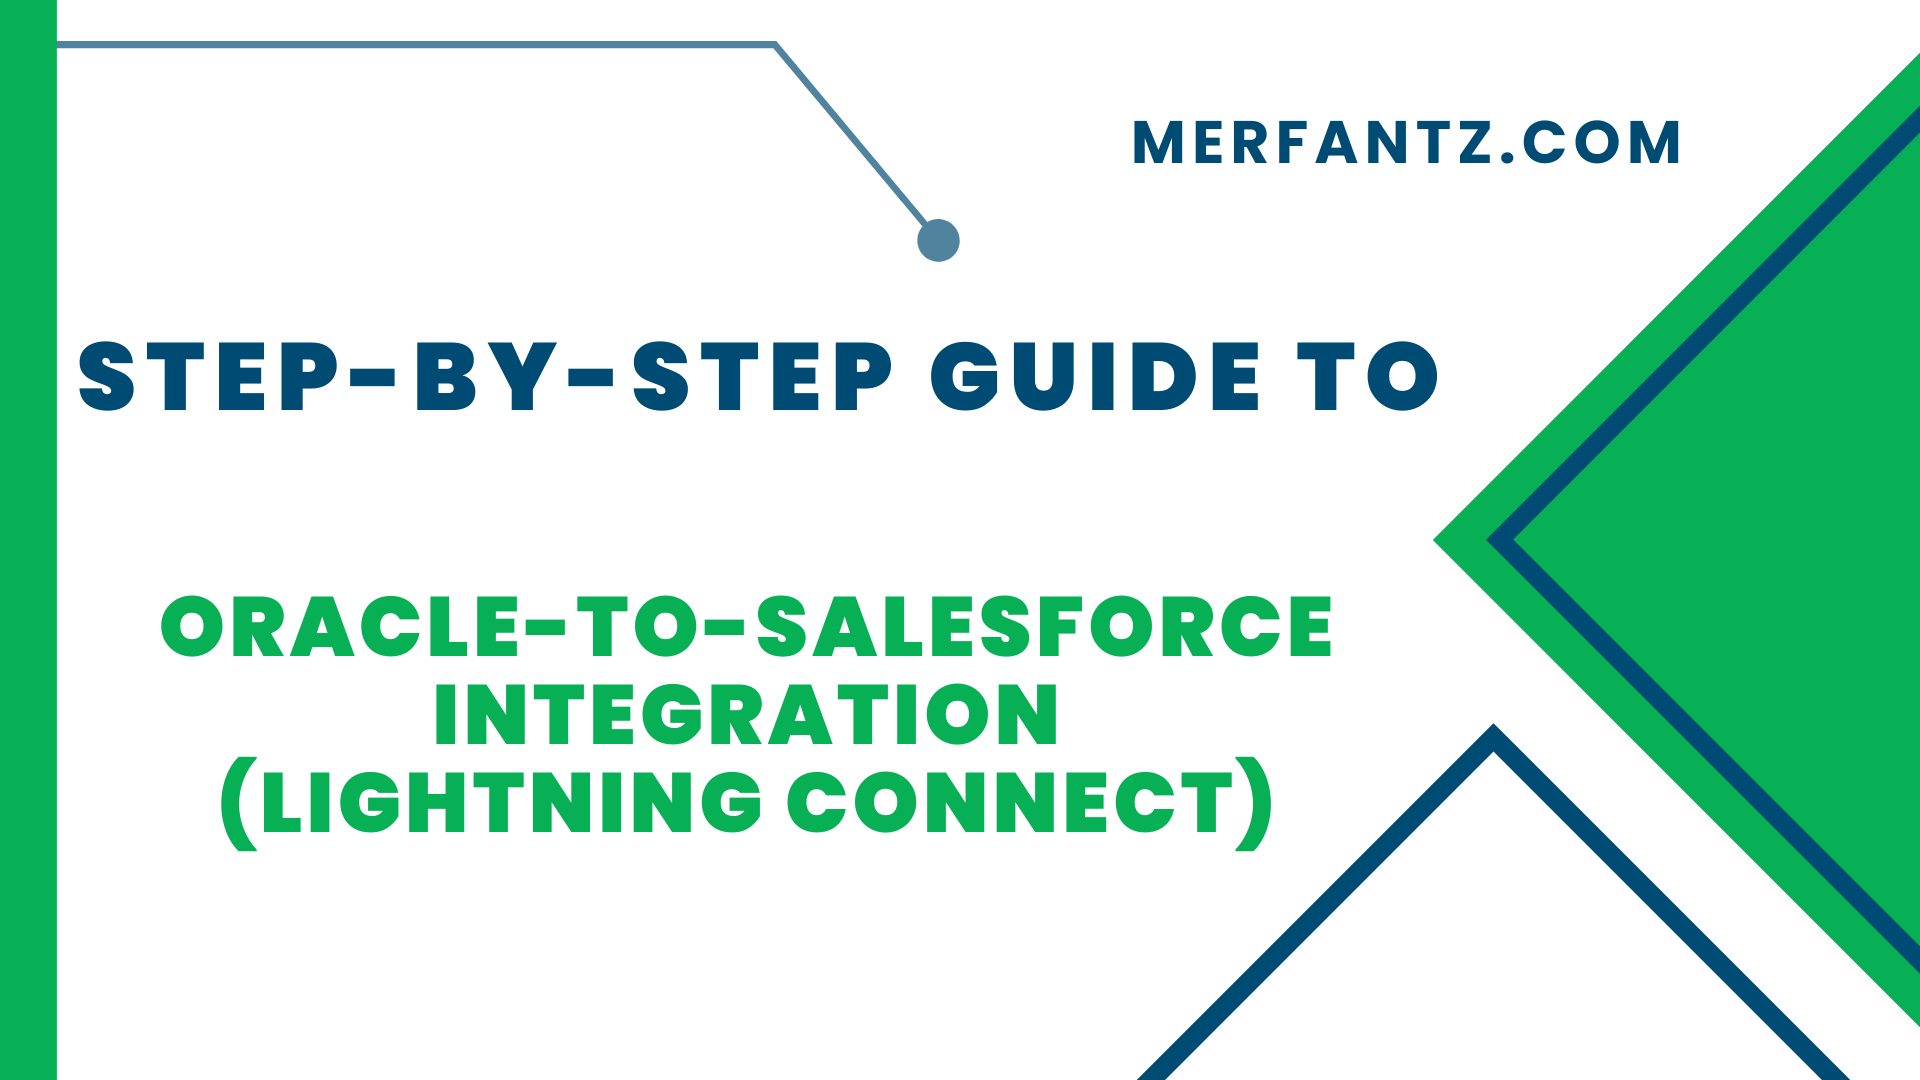 Oracle-to-Salesforce Integration (Lightning Connect)